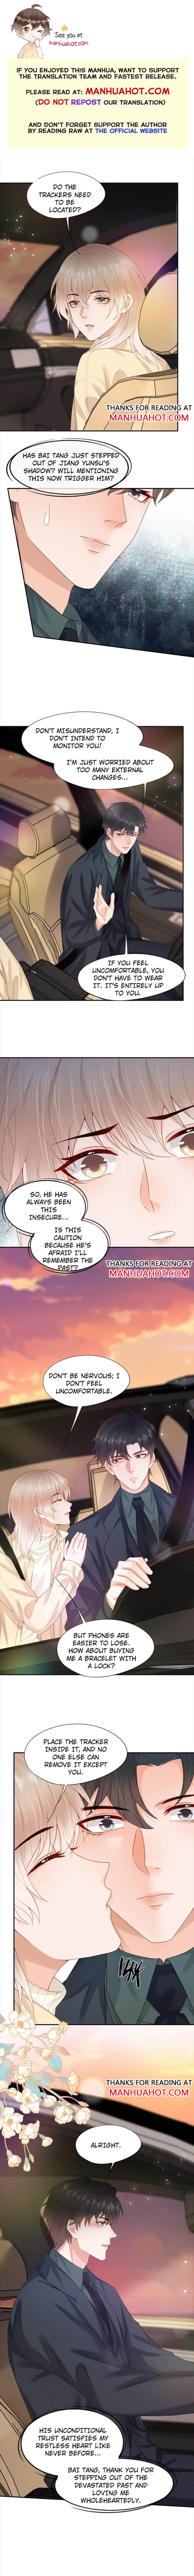 Save My Love - Page 2